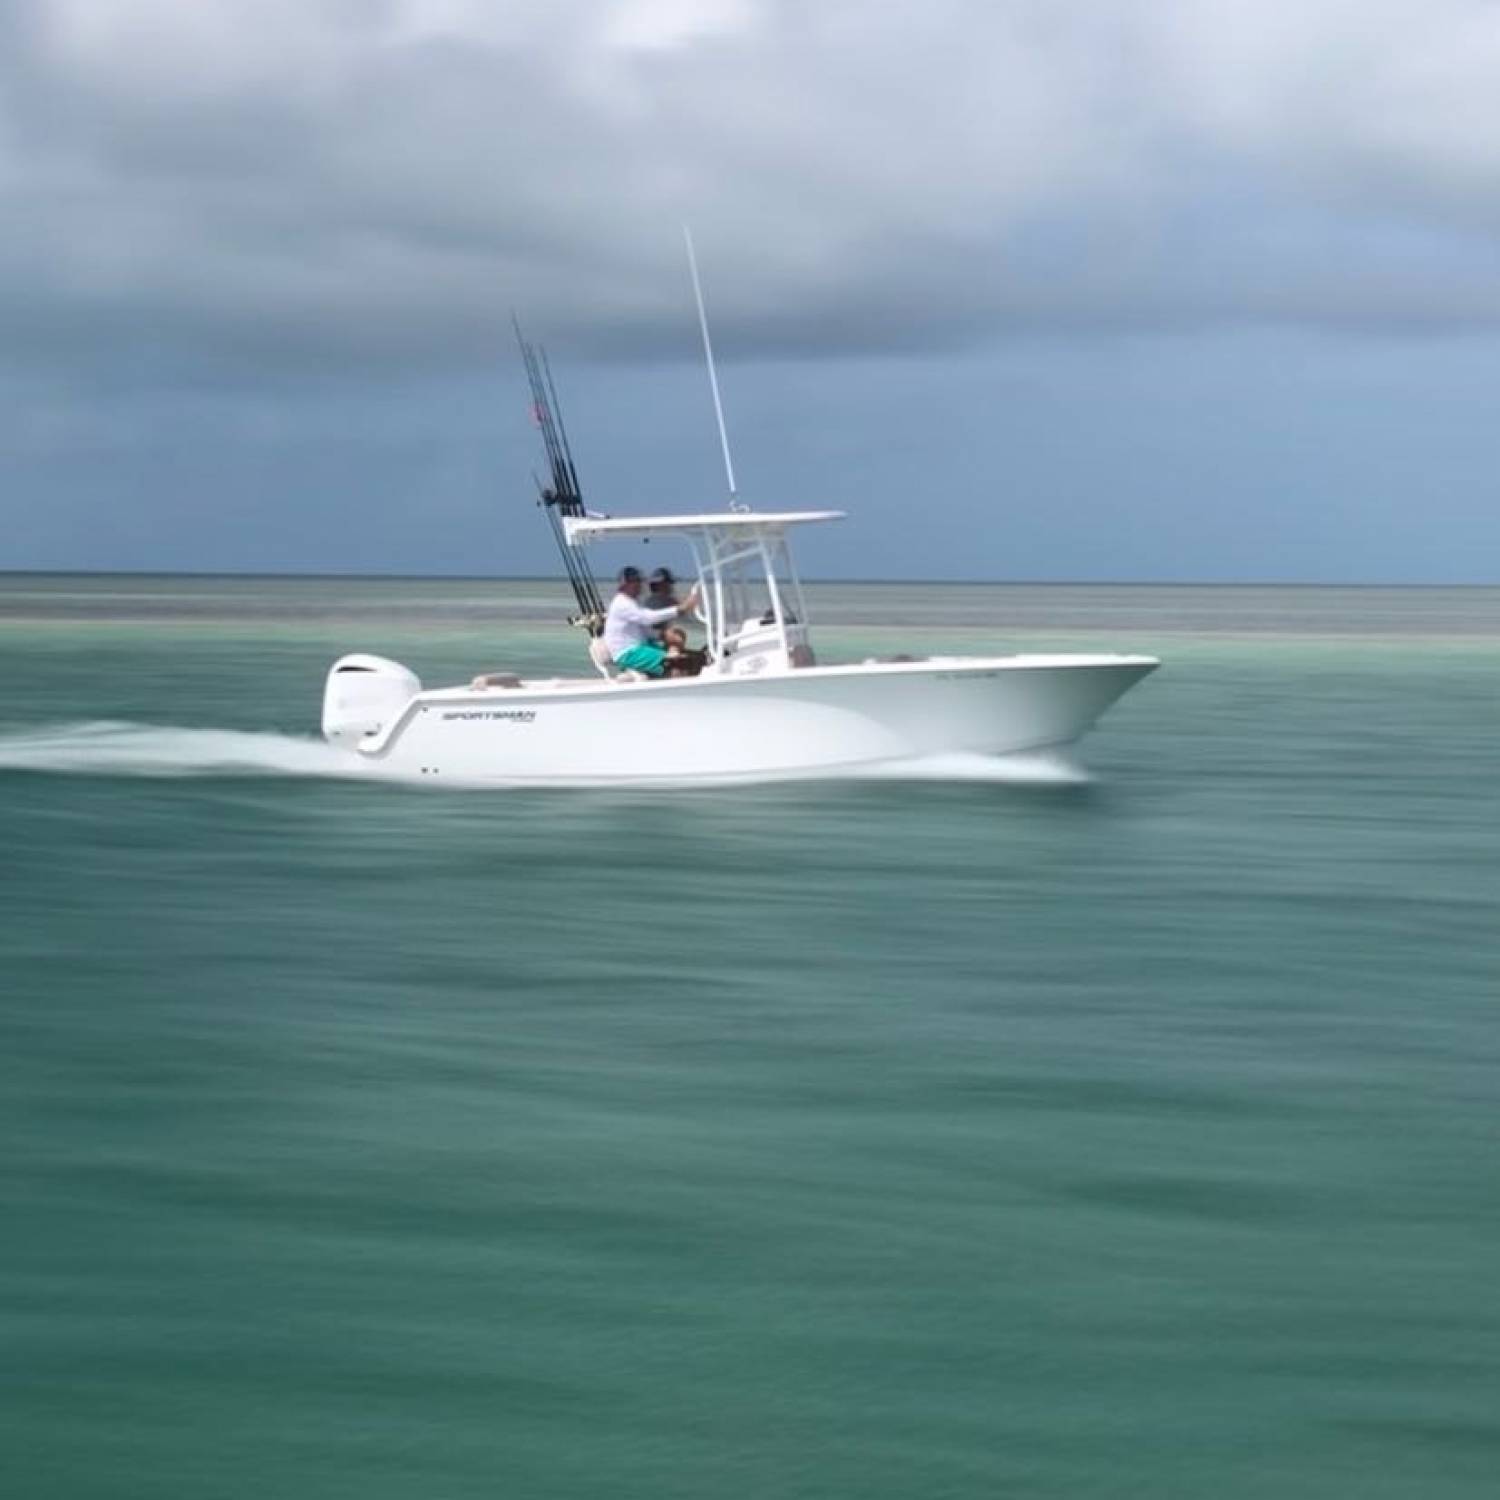 Title: Running shot - On board their Sportsman Open 232 Center Console - Location: Islamorada, Florida Keys. Participating in the Photo Contest #SportsmanFebruary2022